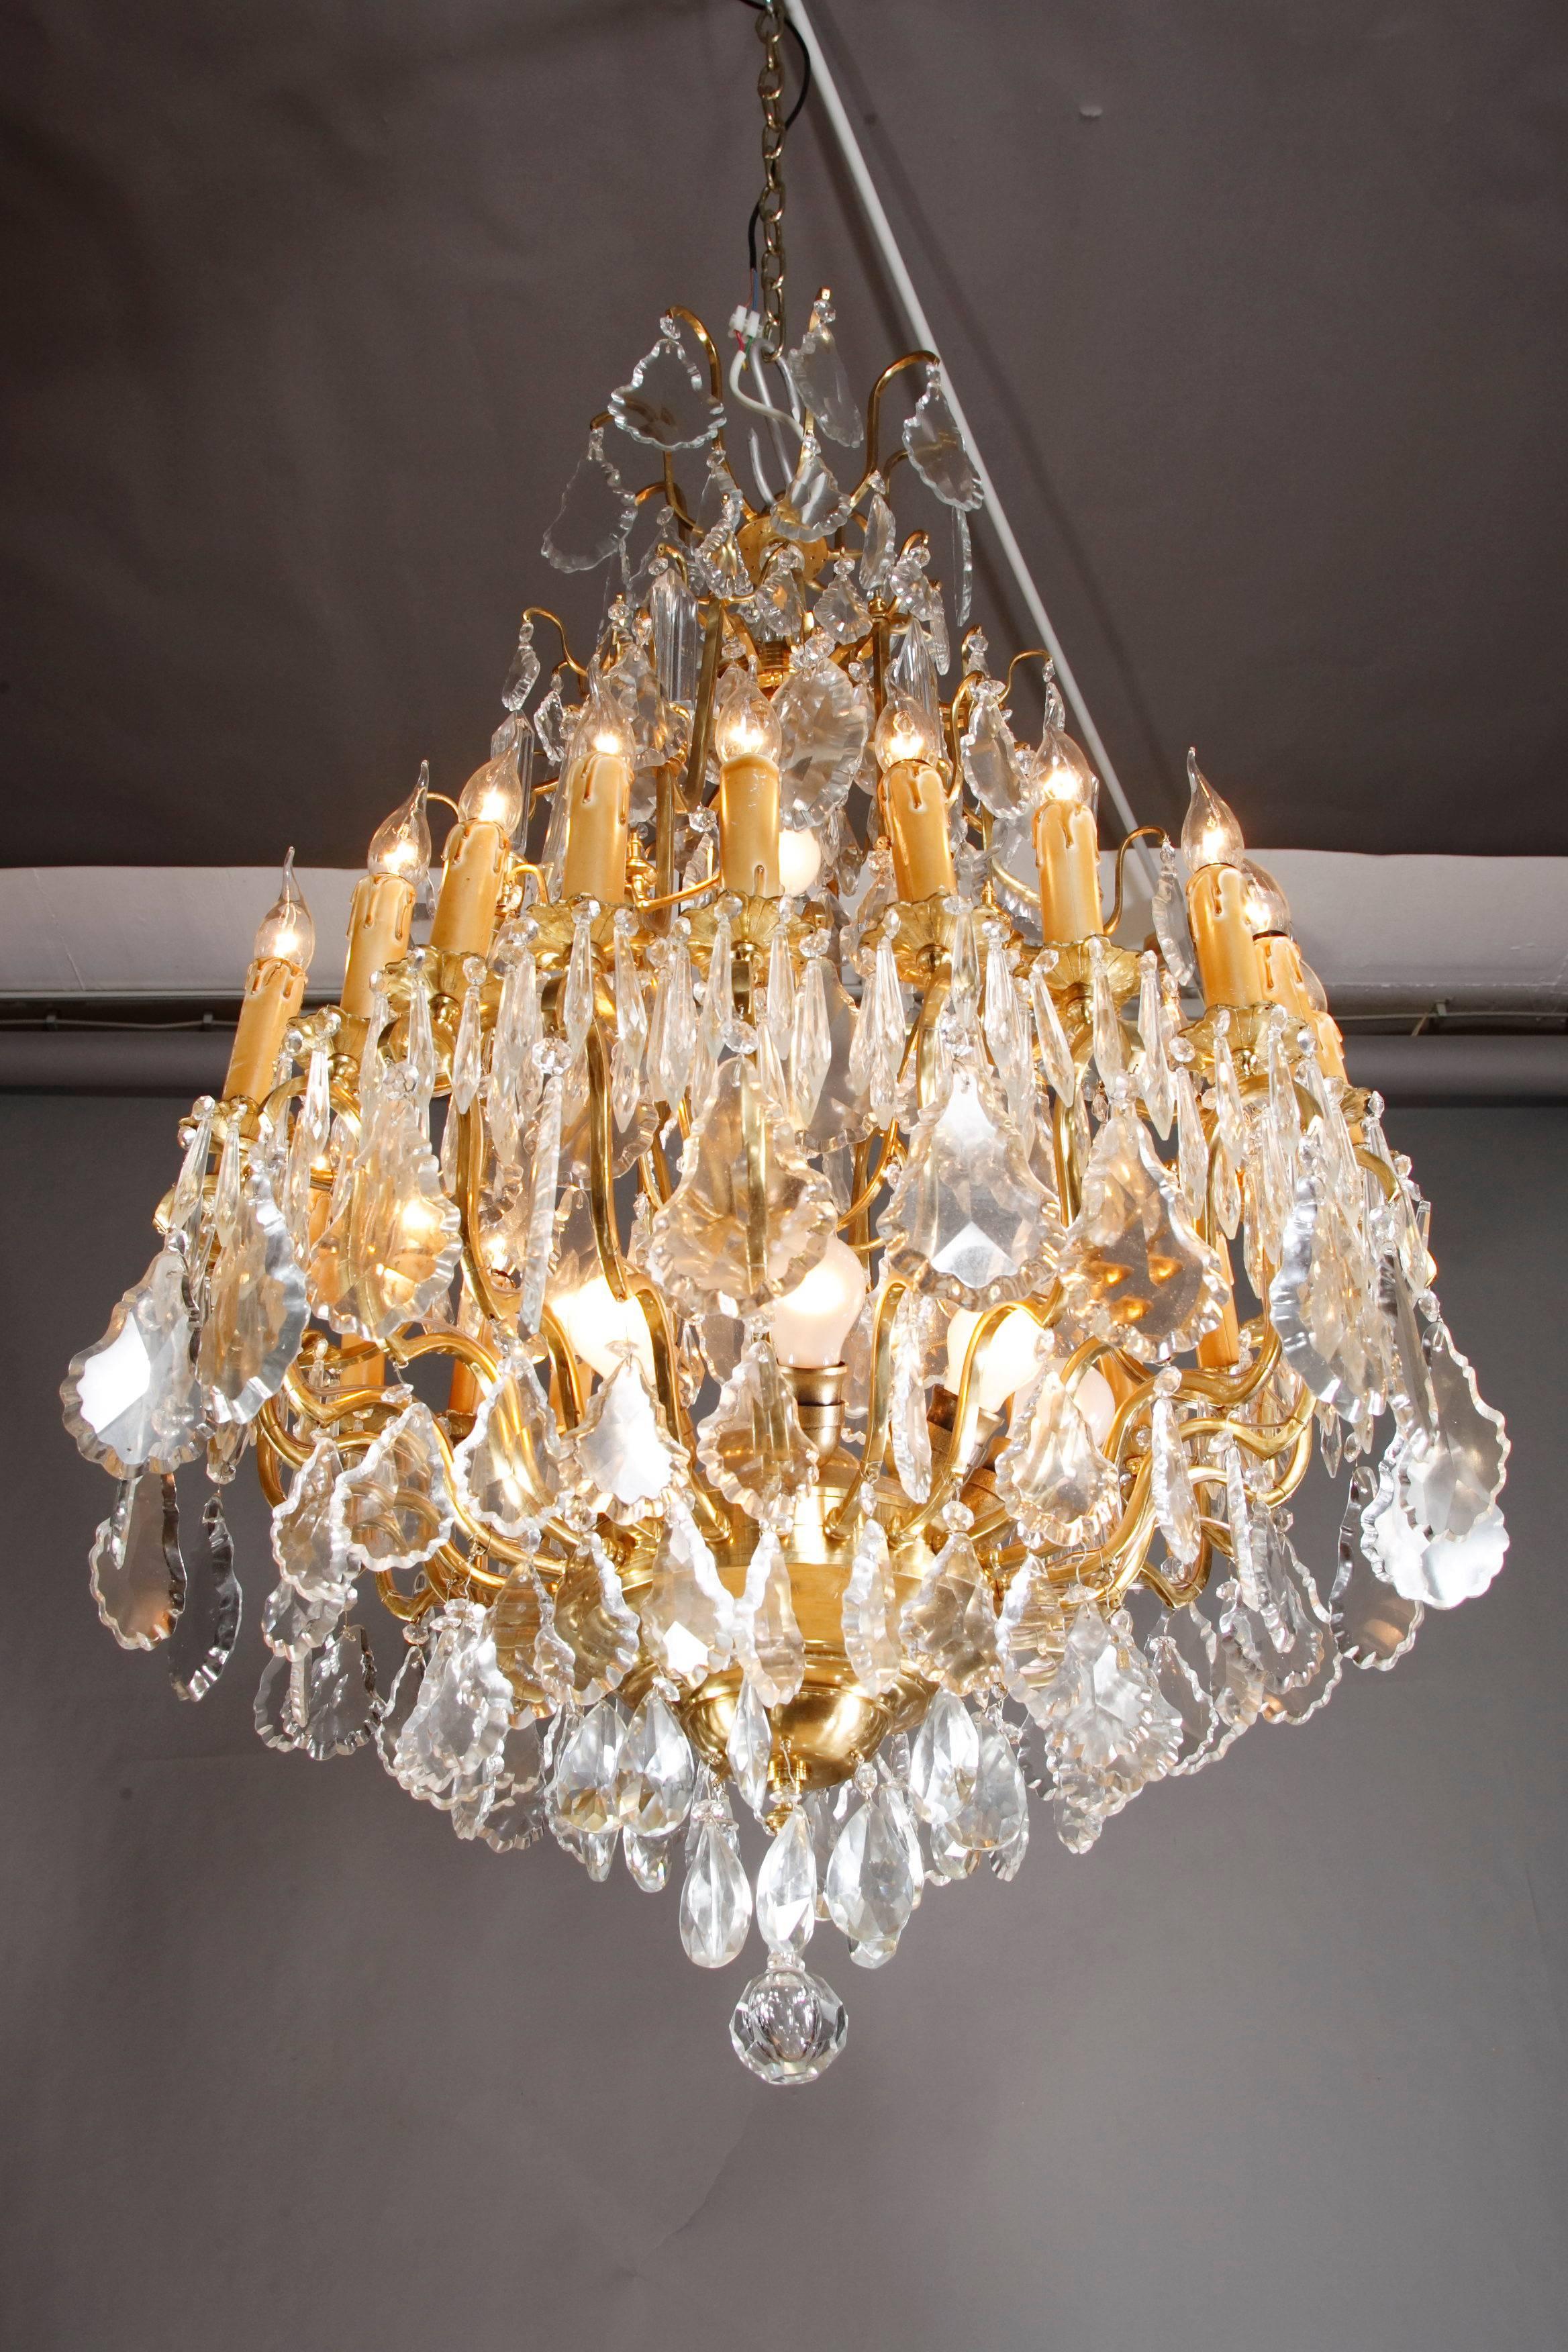 French prisms chandelier in Louis XV style.
Polished brass. Finely ground crystal. Twenty-four curved light arms.

(F-Hud-2).